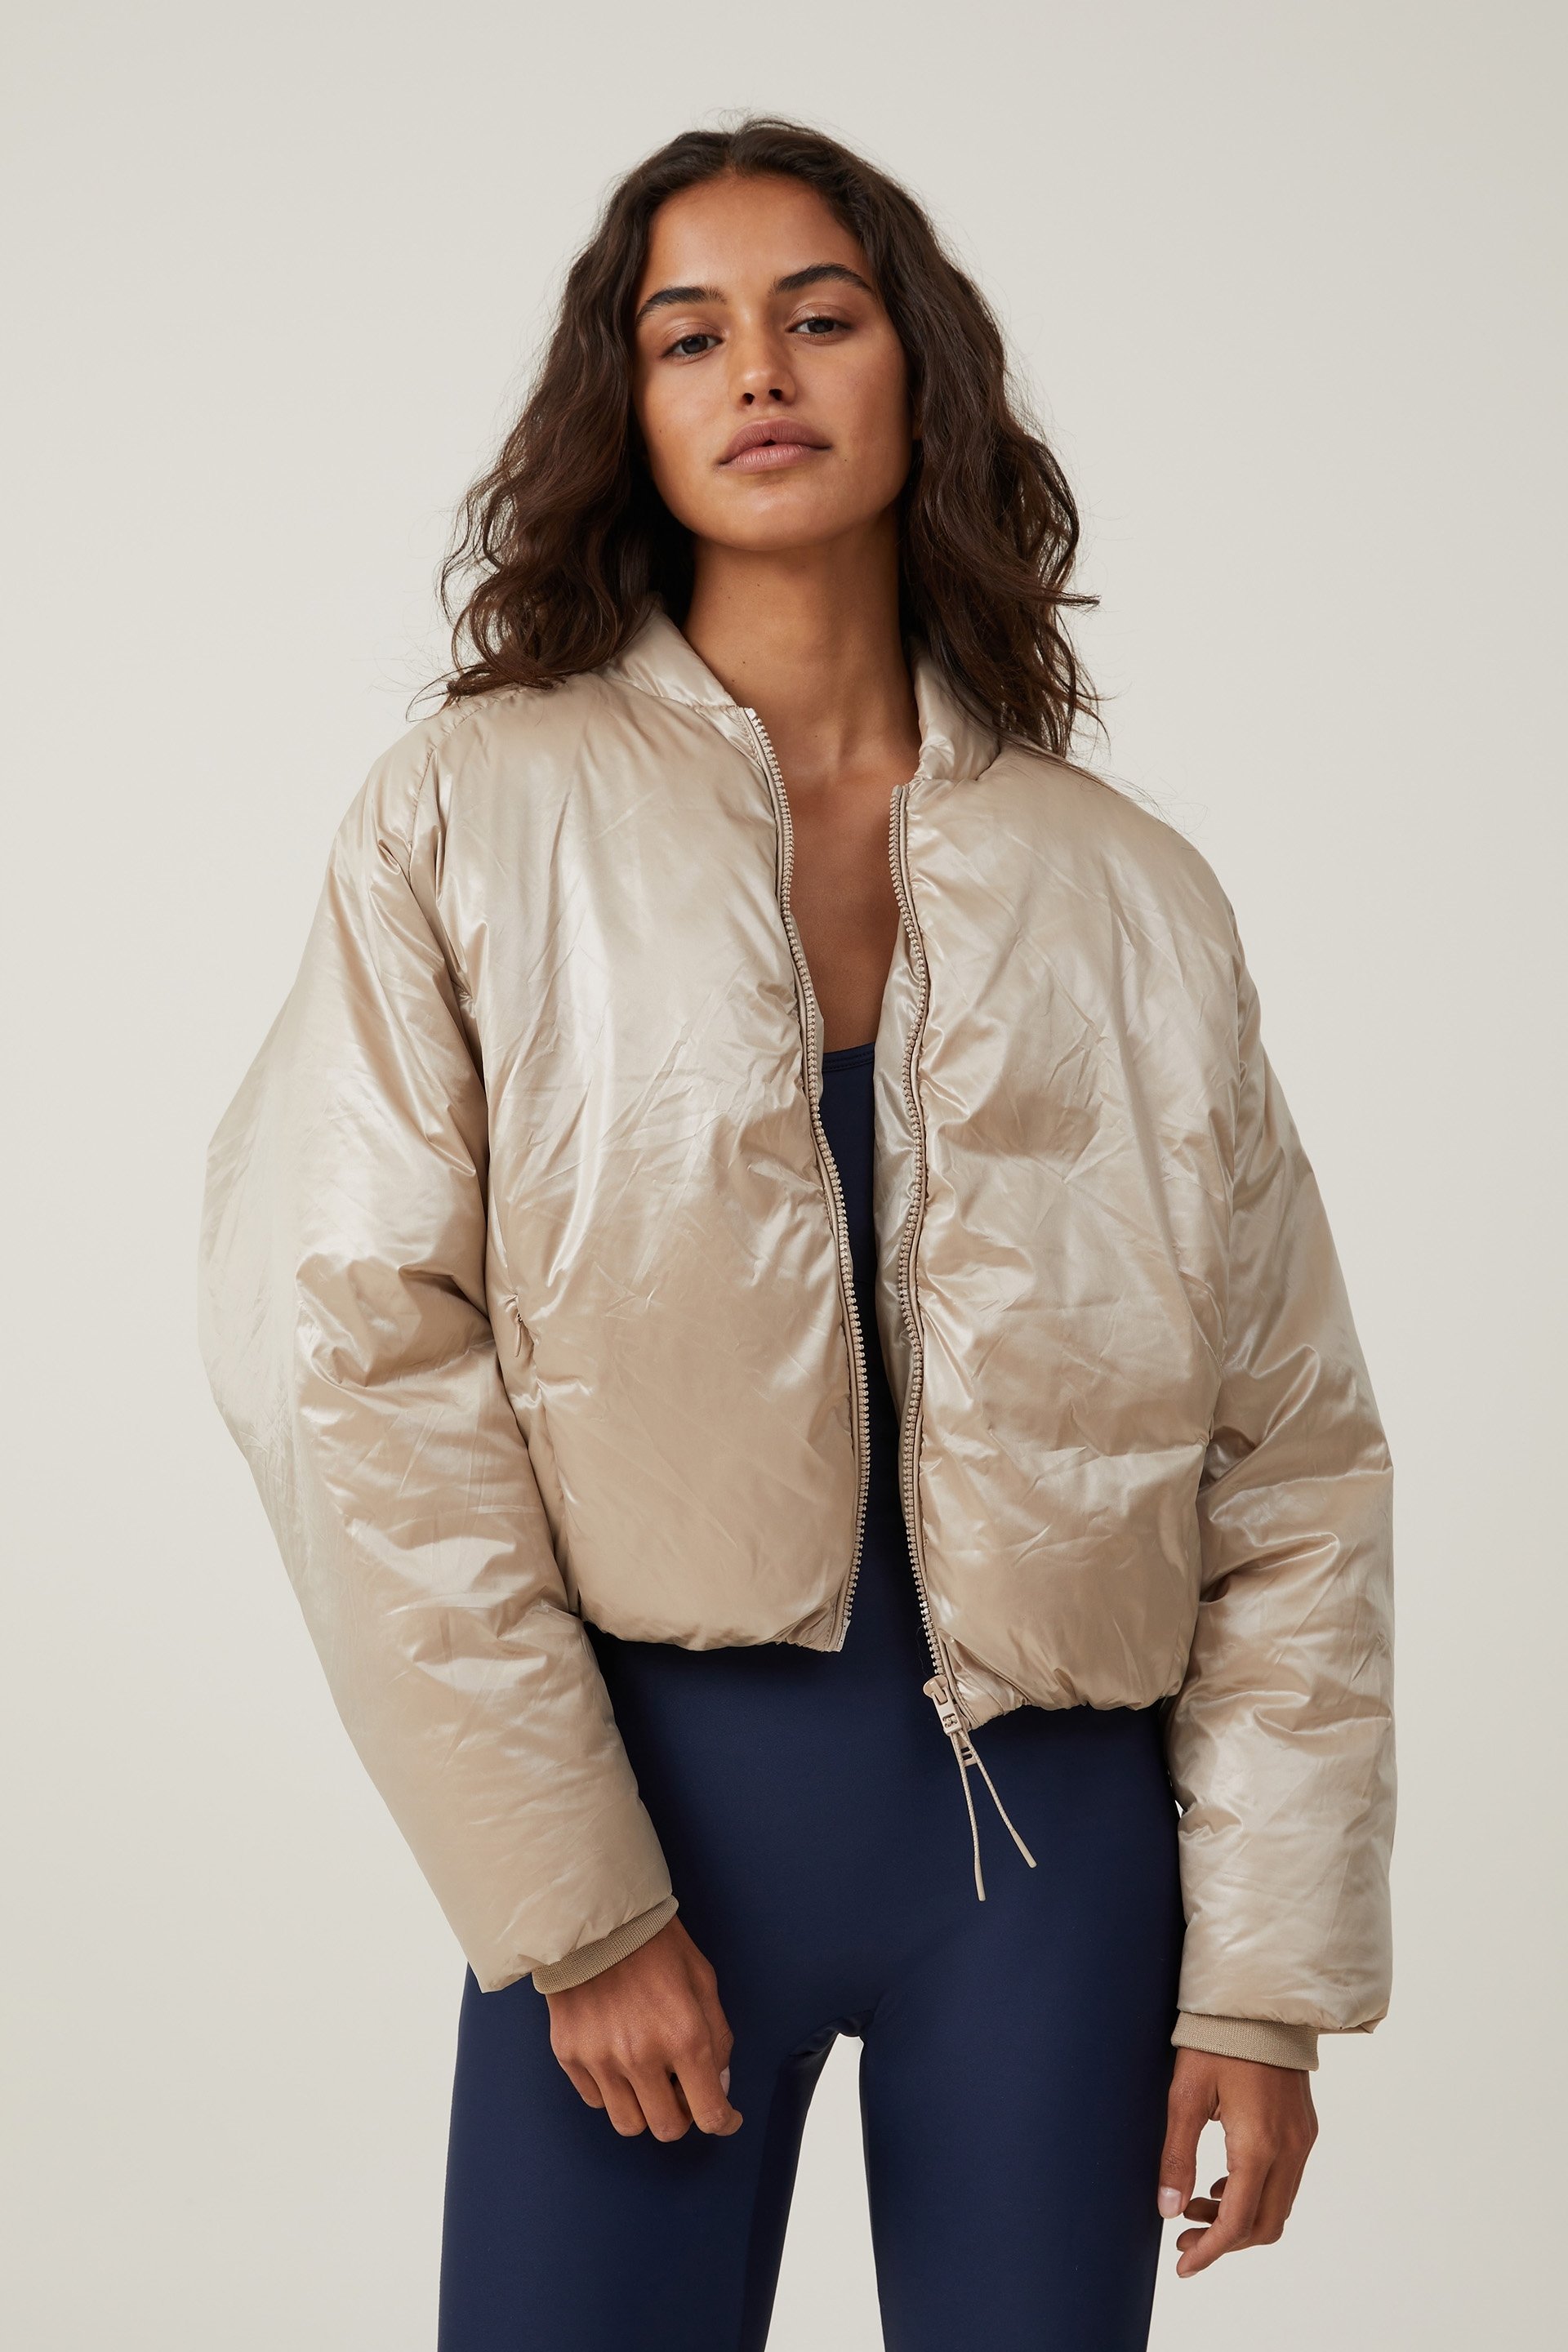 Body - The Recycled Mother Puffer Bomber Jacket - White pepper